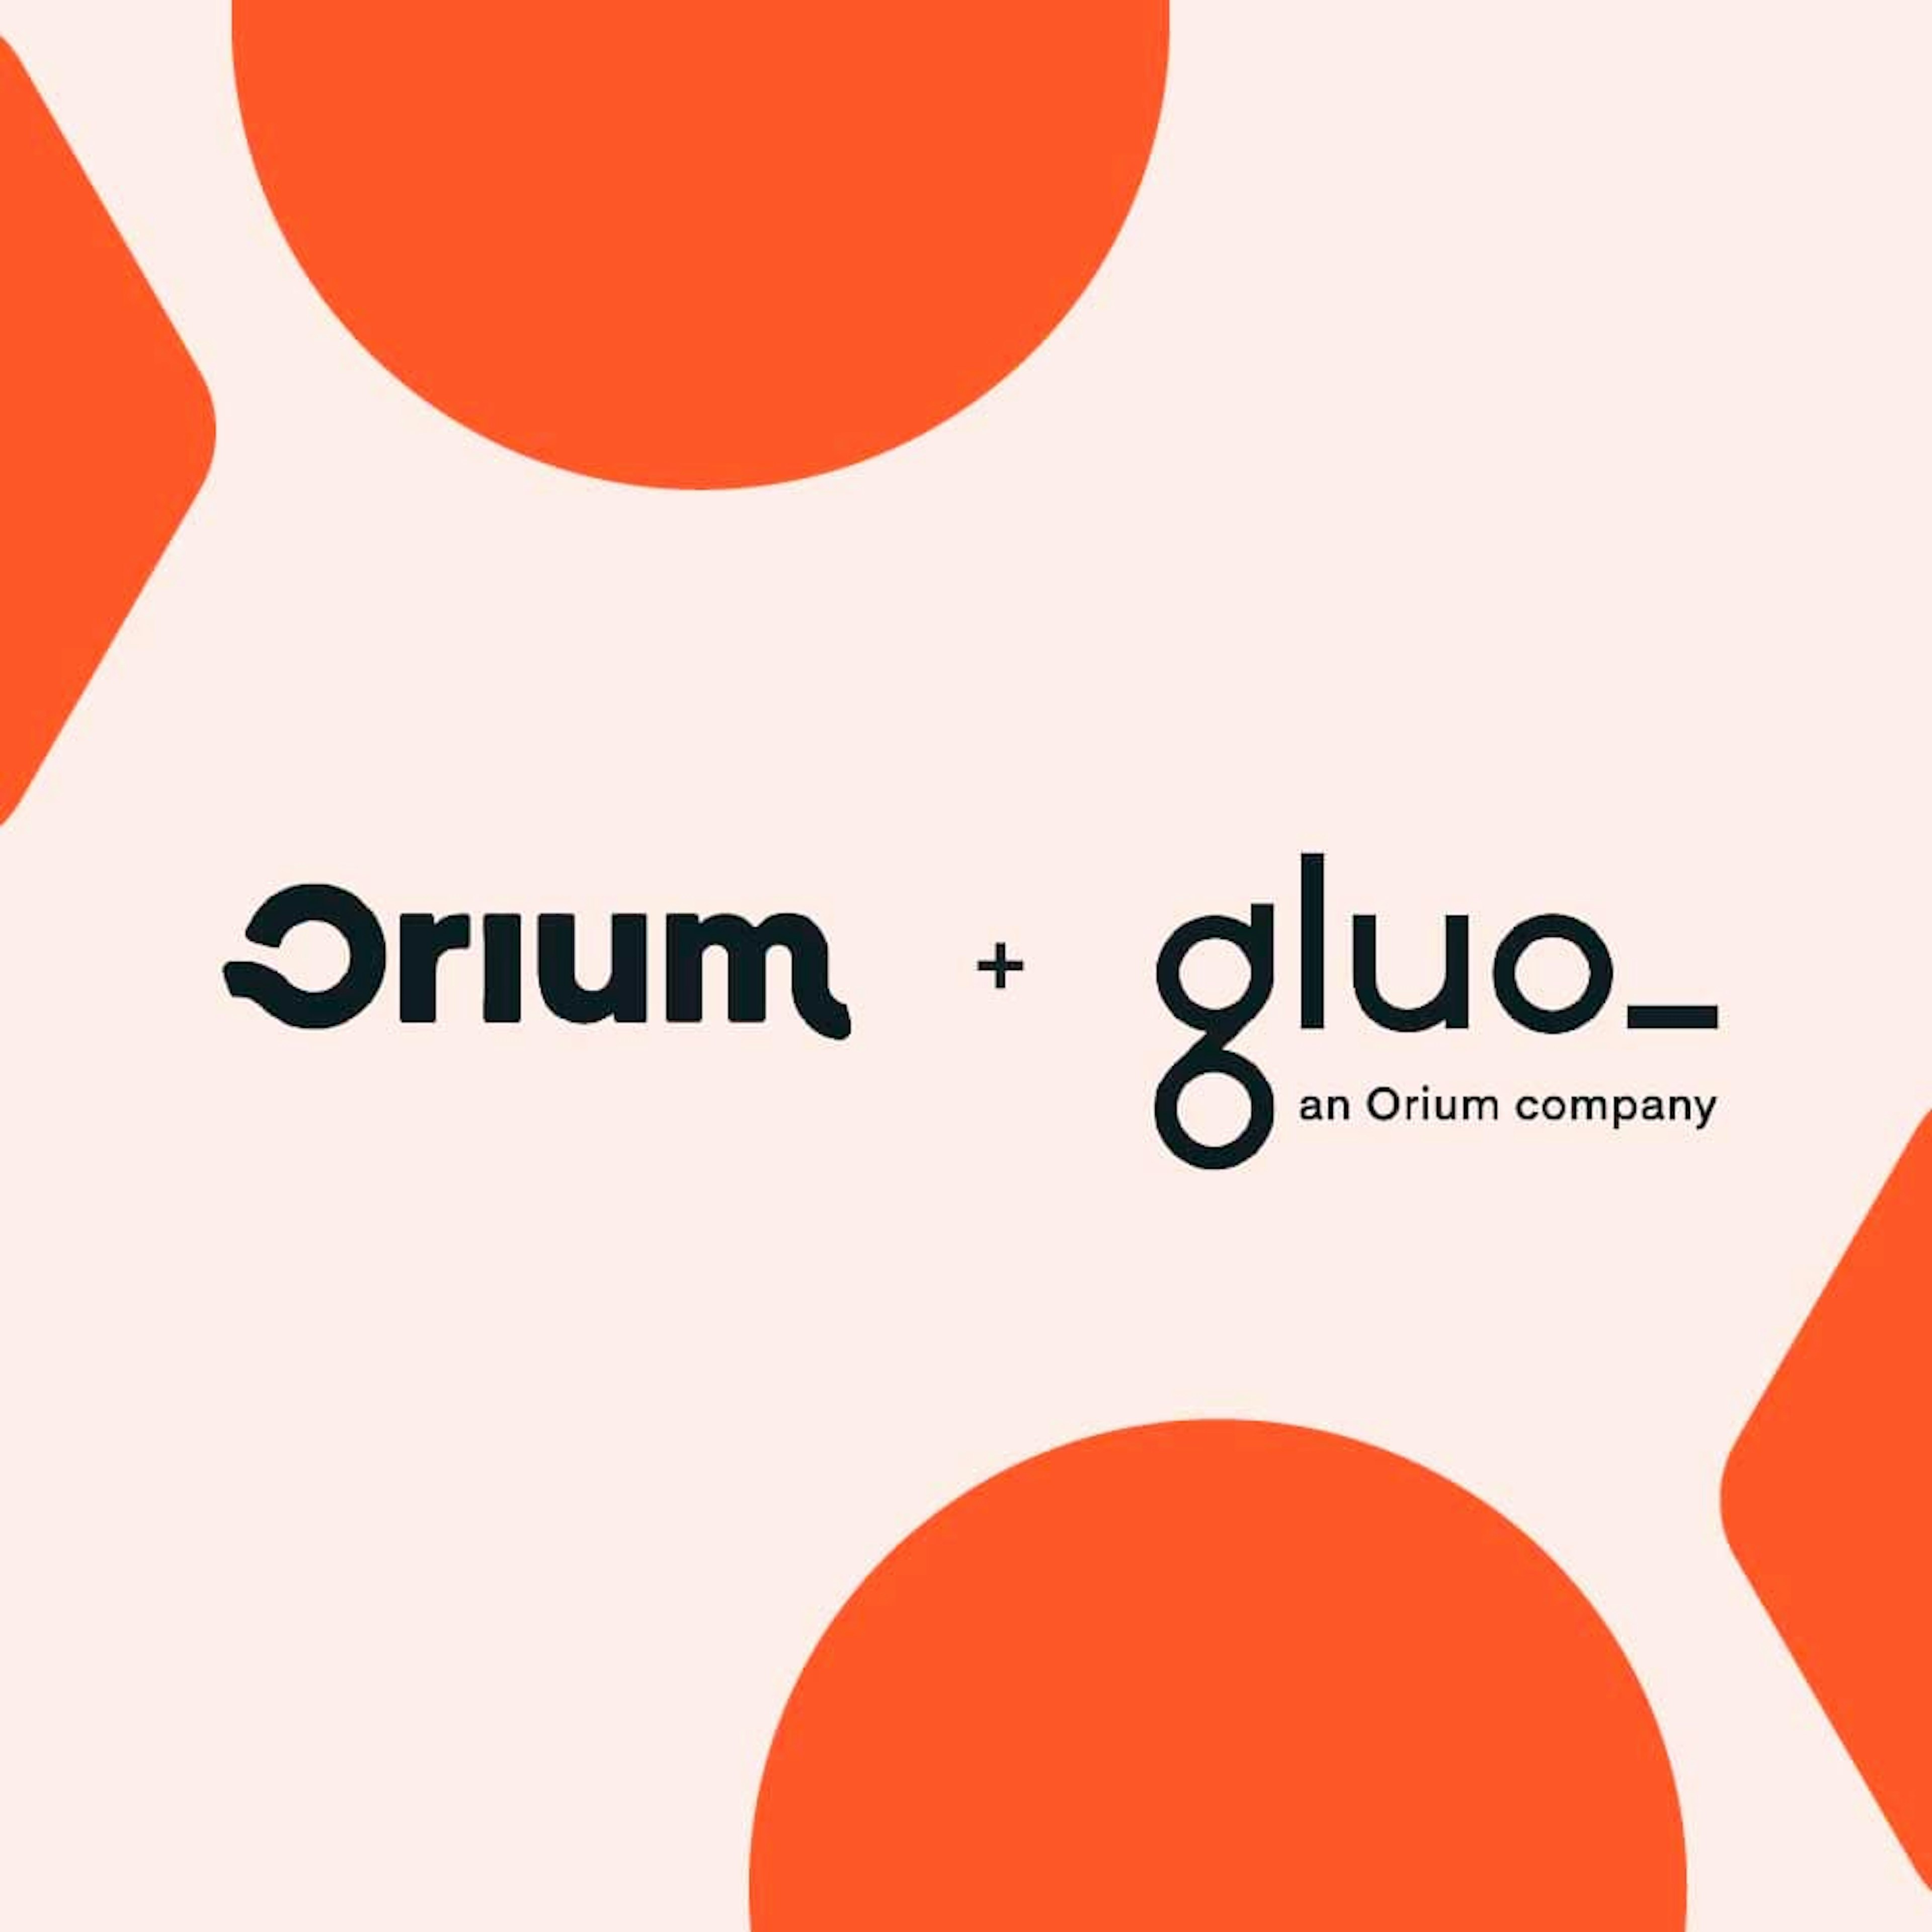 Light orange background with darker orange shapes at the corners and the Orium and Gluo logos in the middle of the image